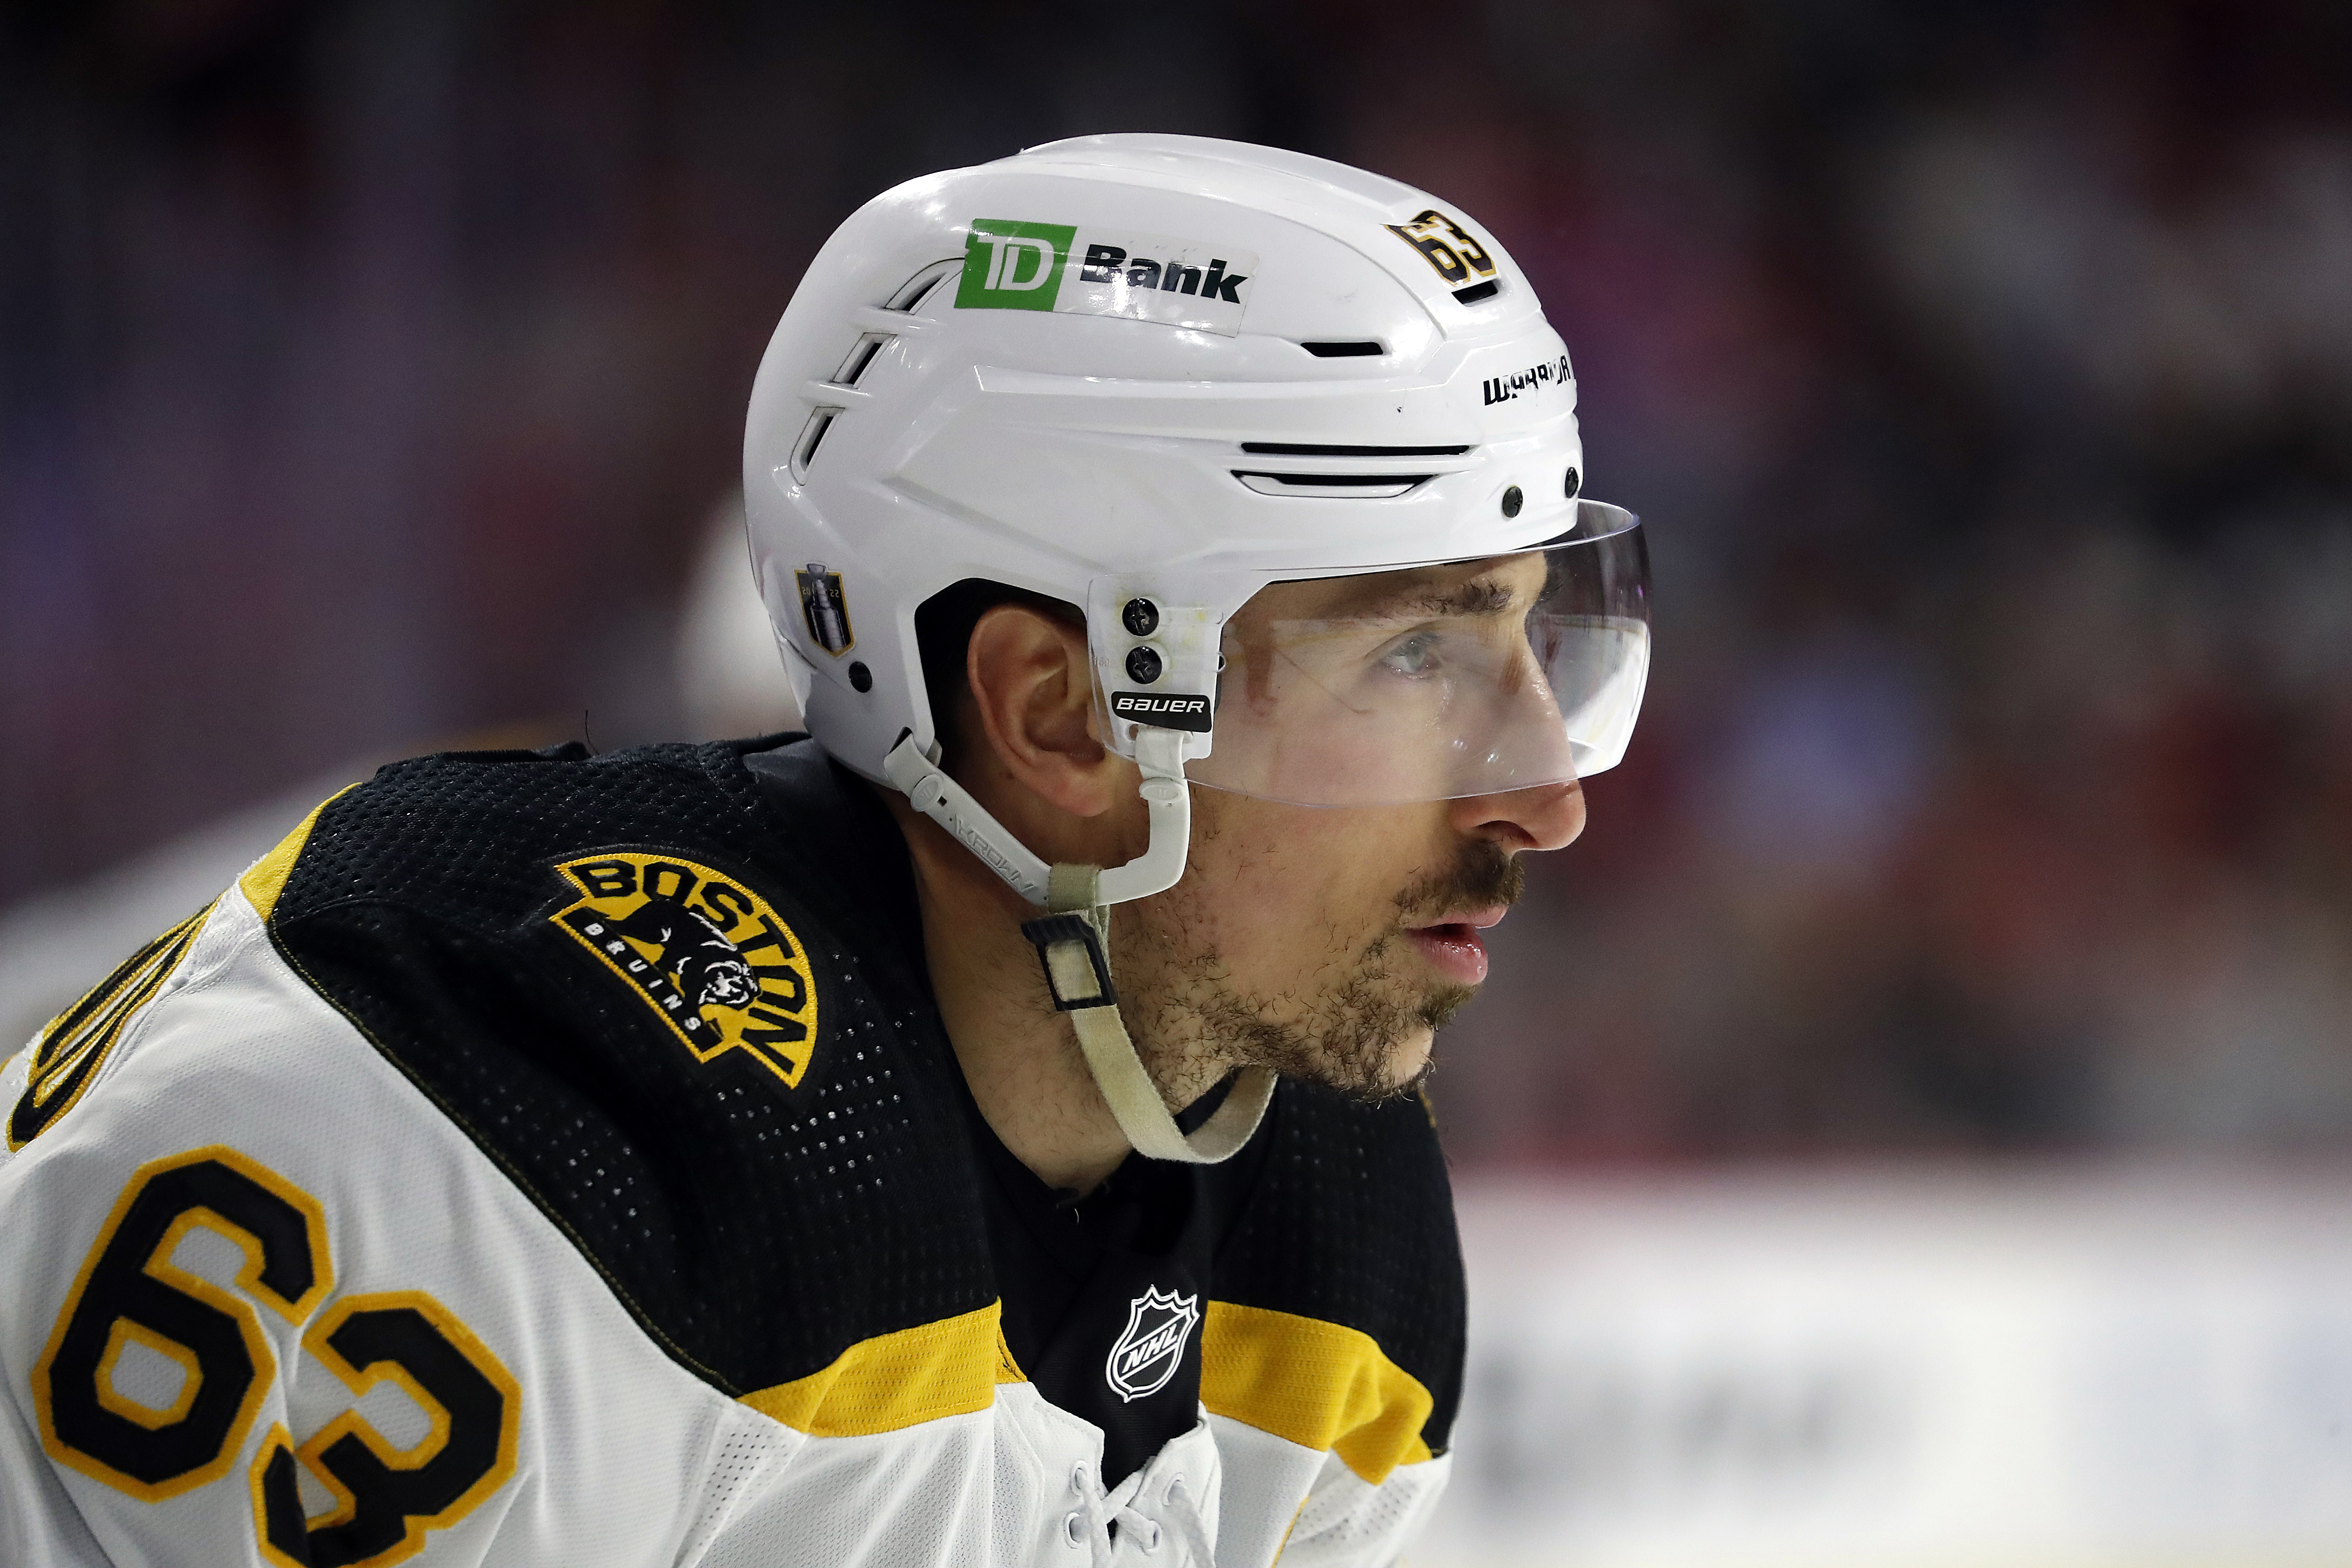 Brad Marchand's best social media moments - Gino Hard